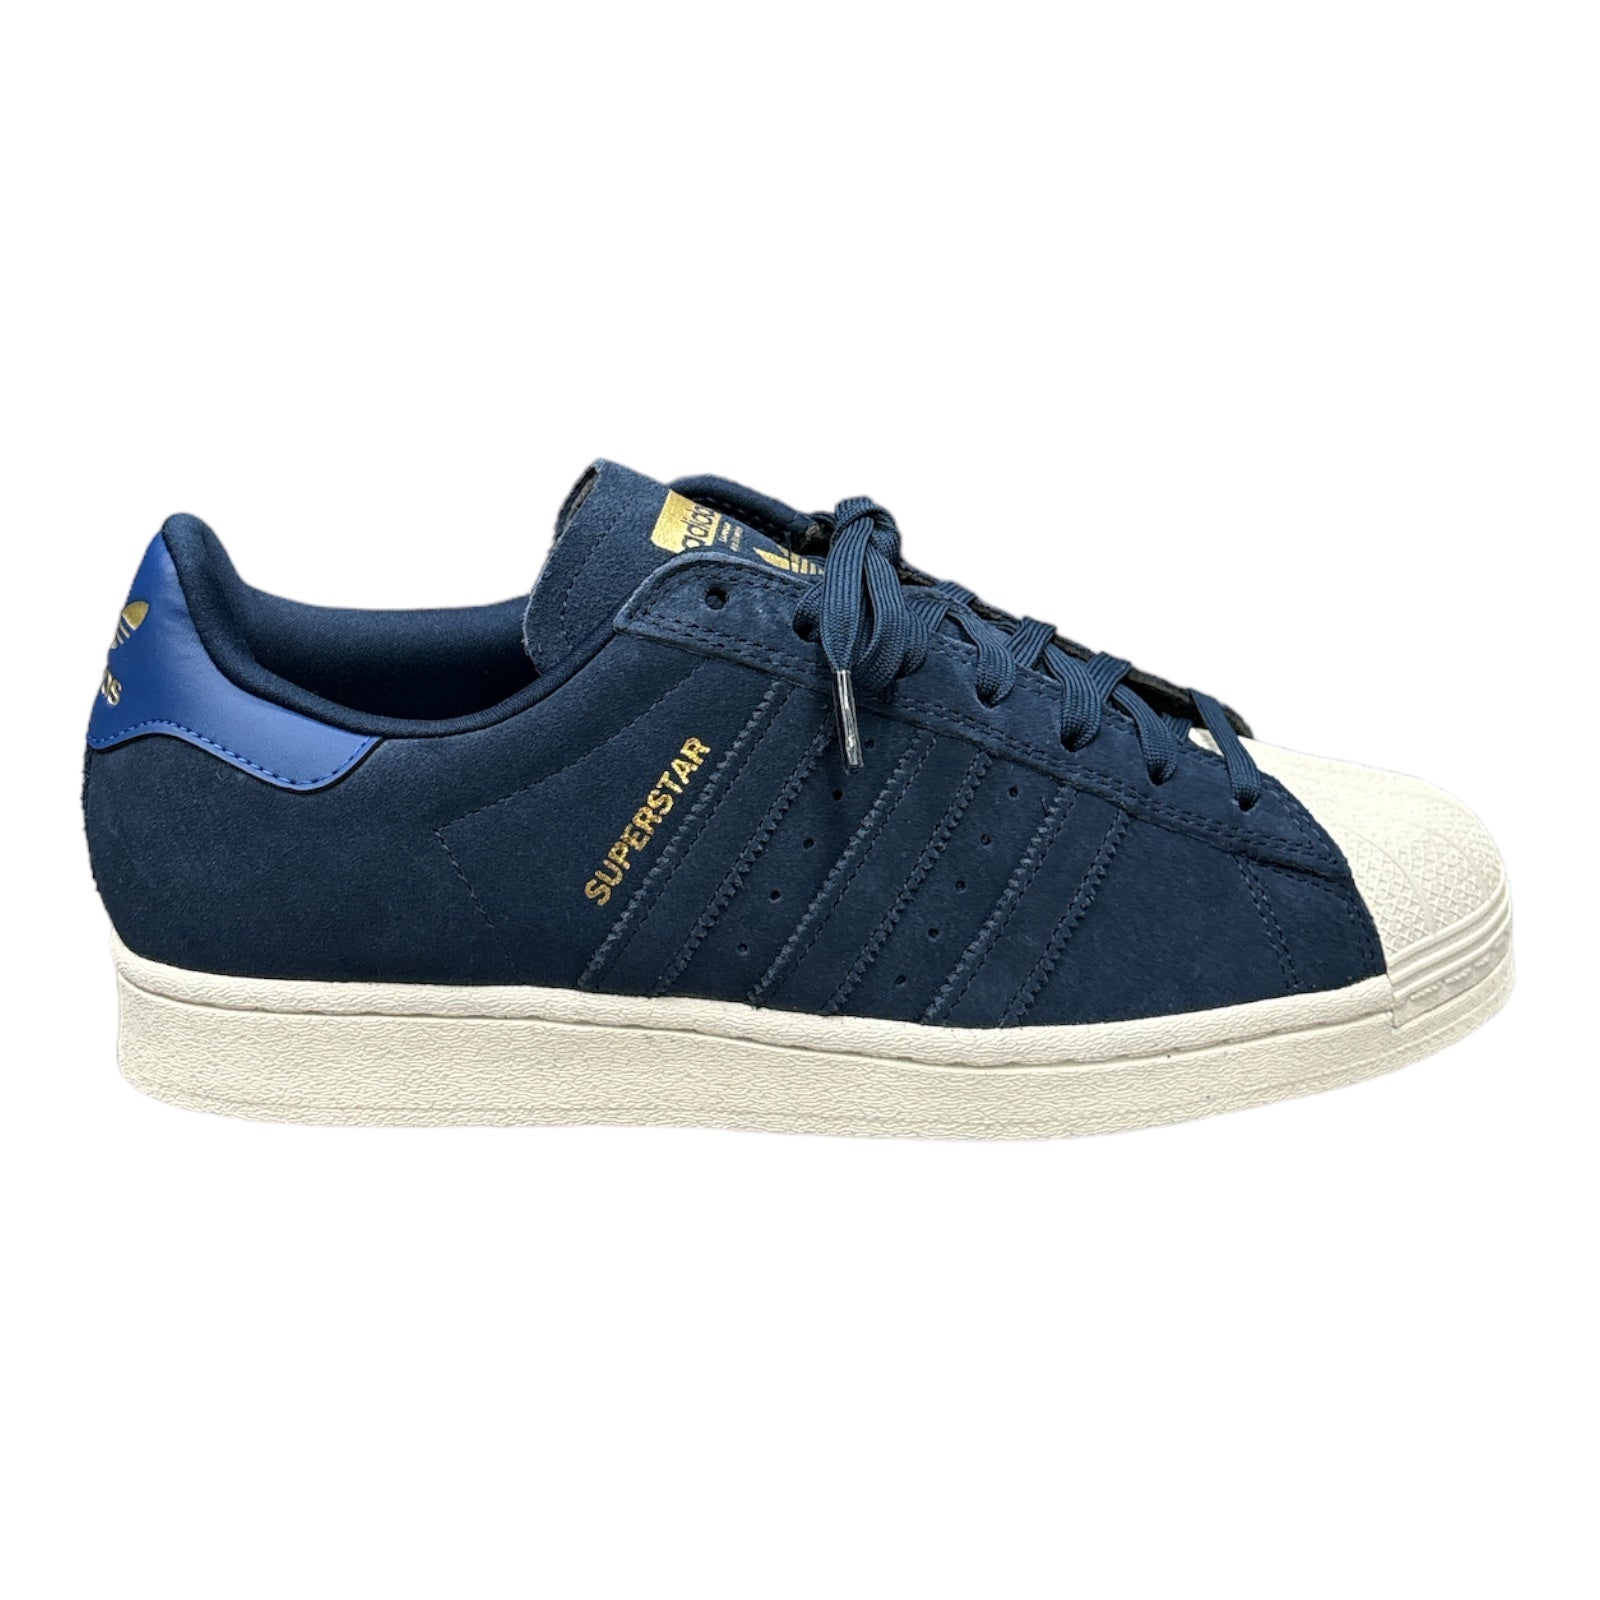 Adidas Superstar ADV Shoe in Navy Suede with white outsole.